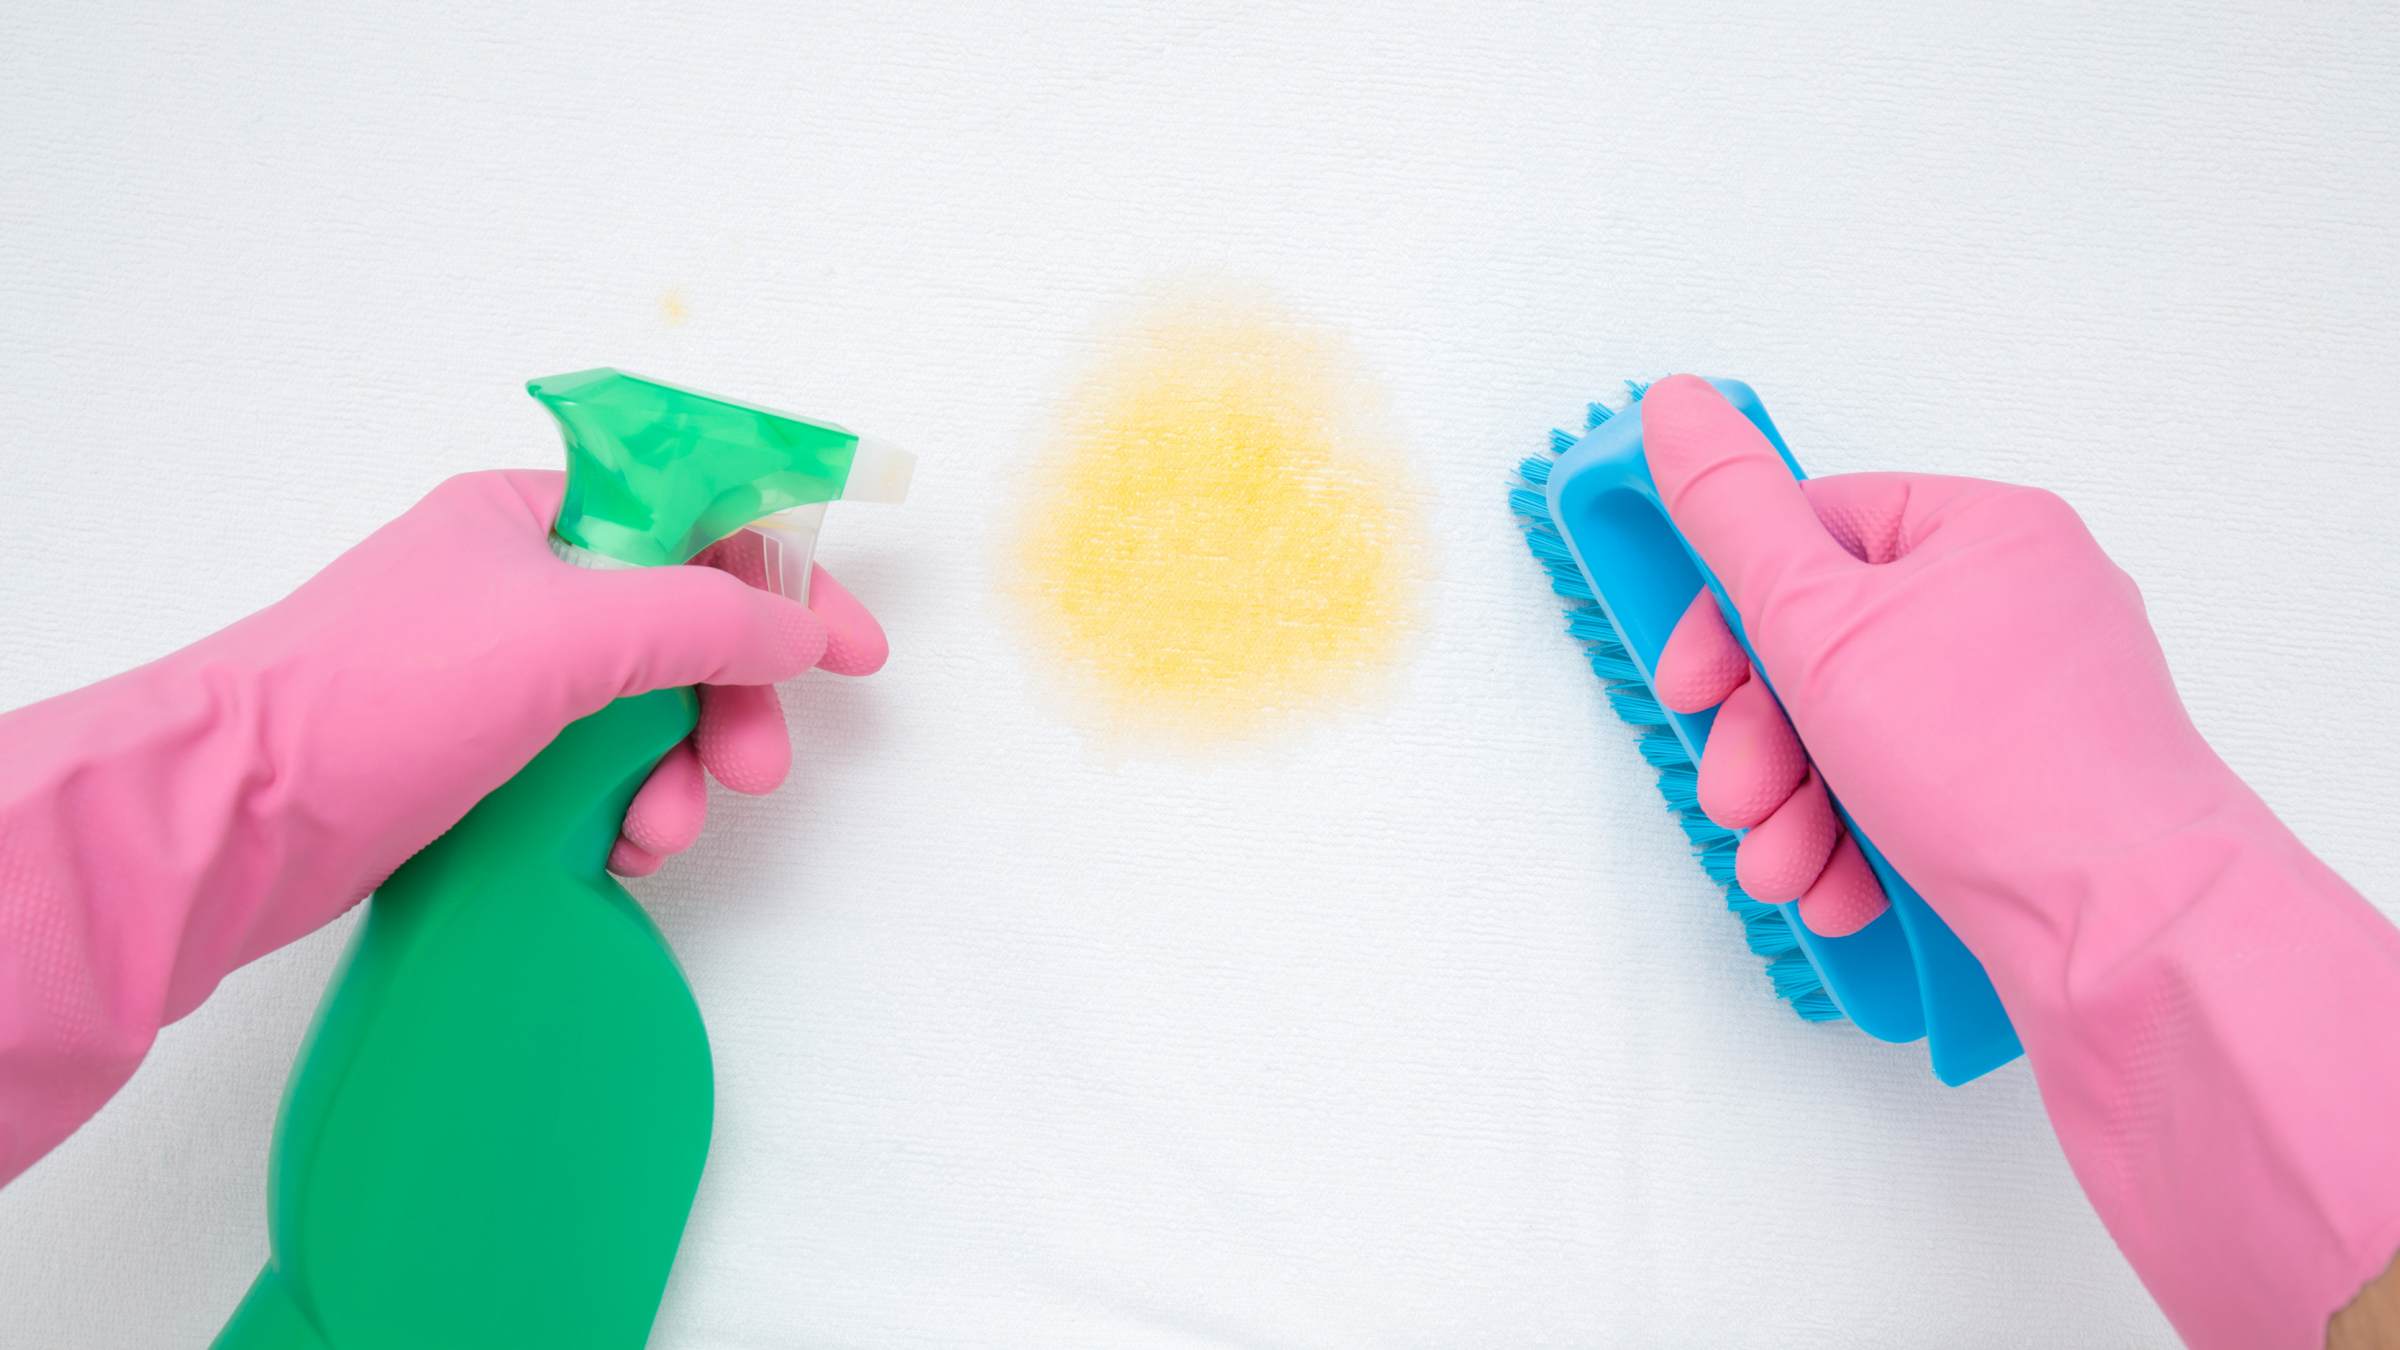 Cleaning stain with bio or non bio detergent